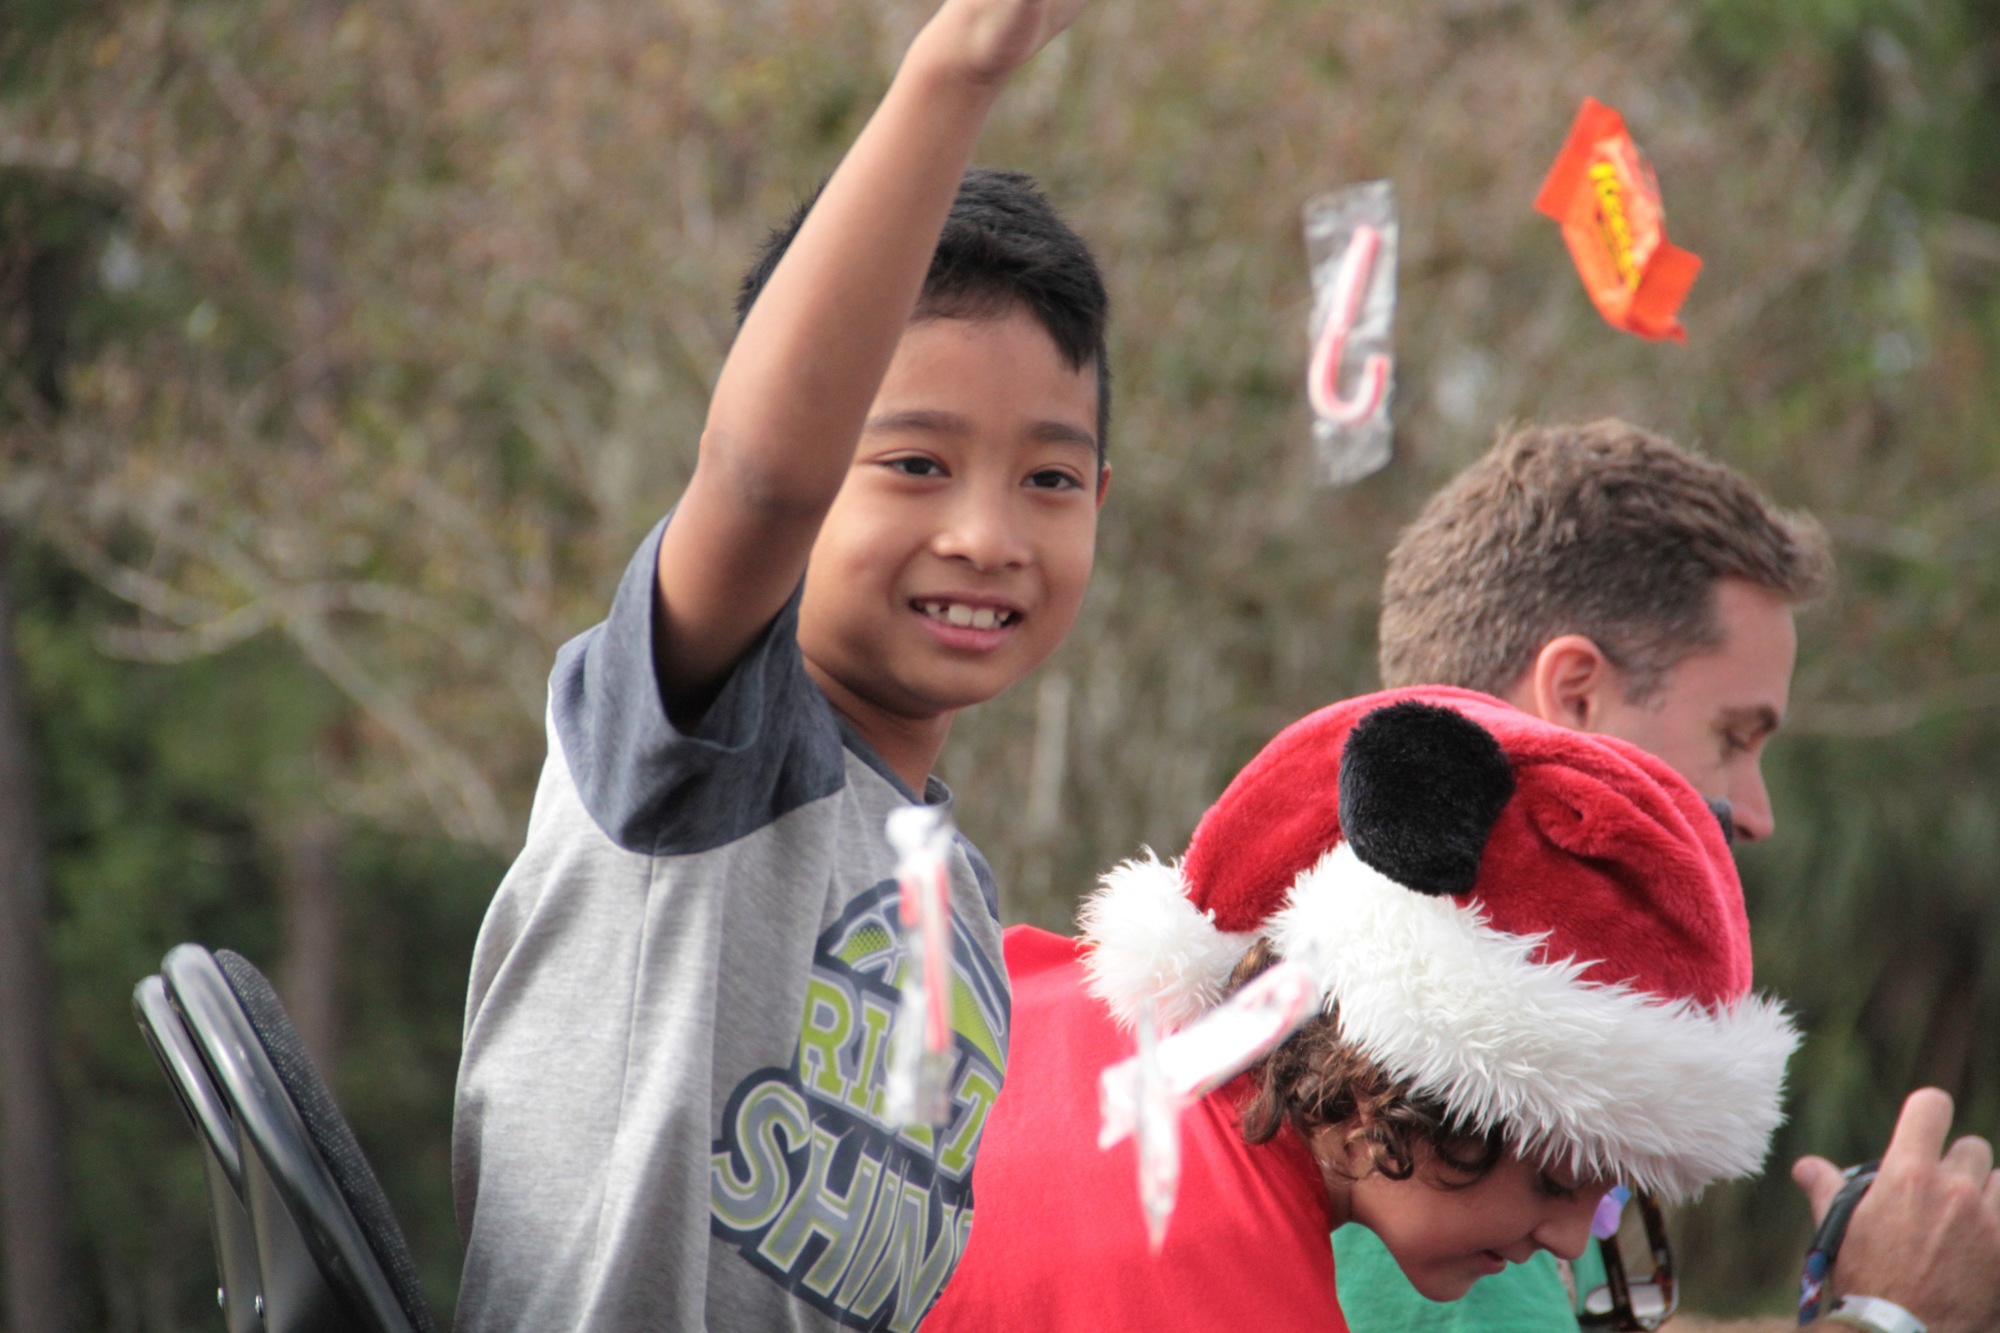 A child throws candy for the crowd during the parade. Photo by Nichole Osinski